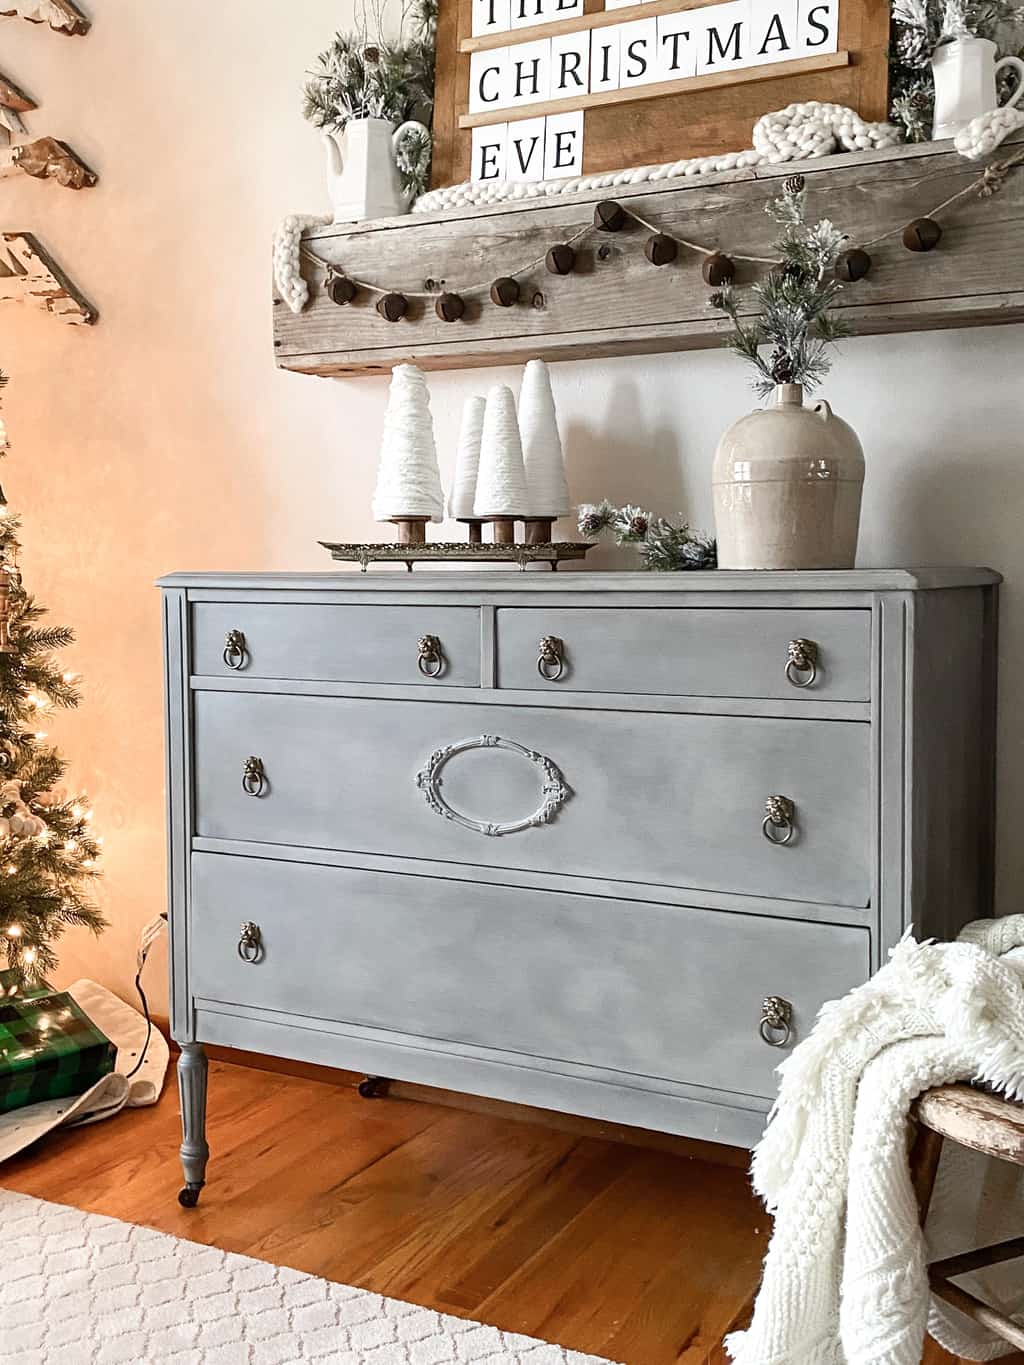 This French Provincial Dresser Makeover turns an old dresser into a beautiful piece with paint and wax.